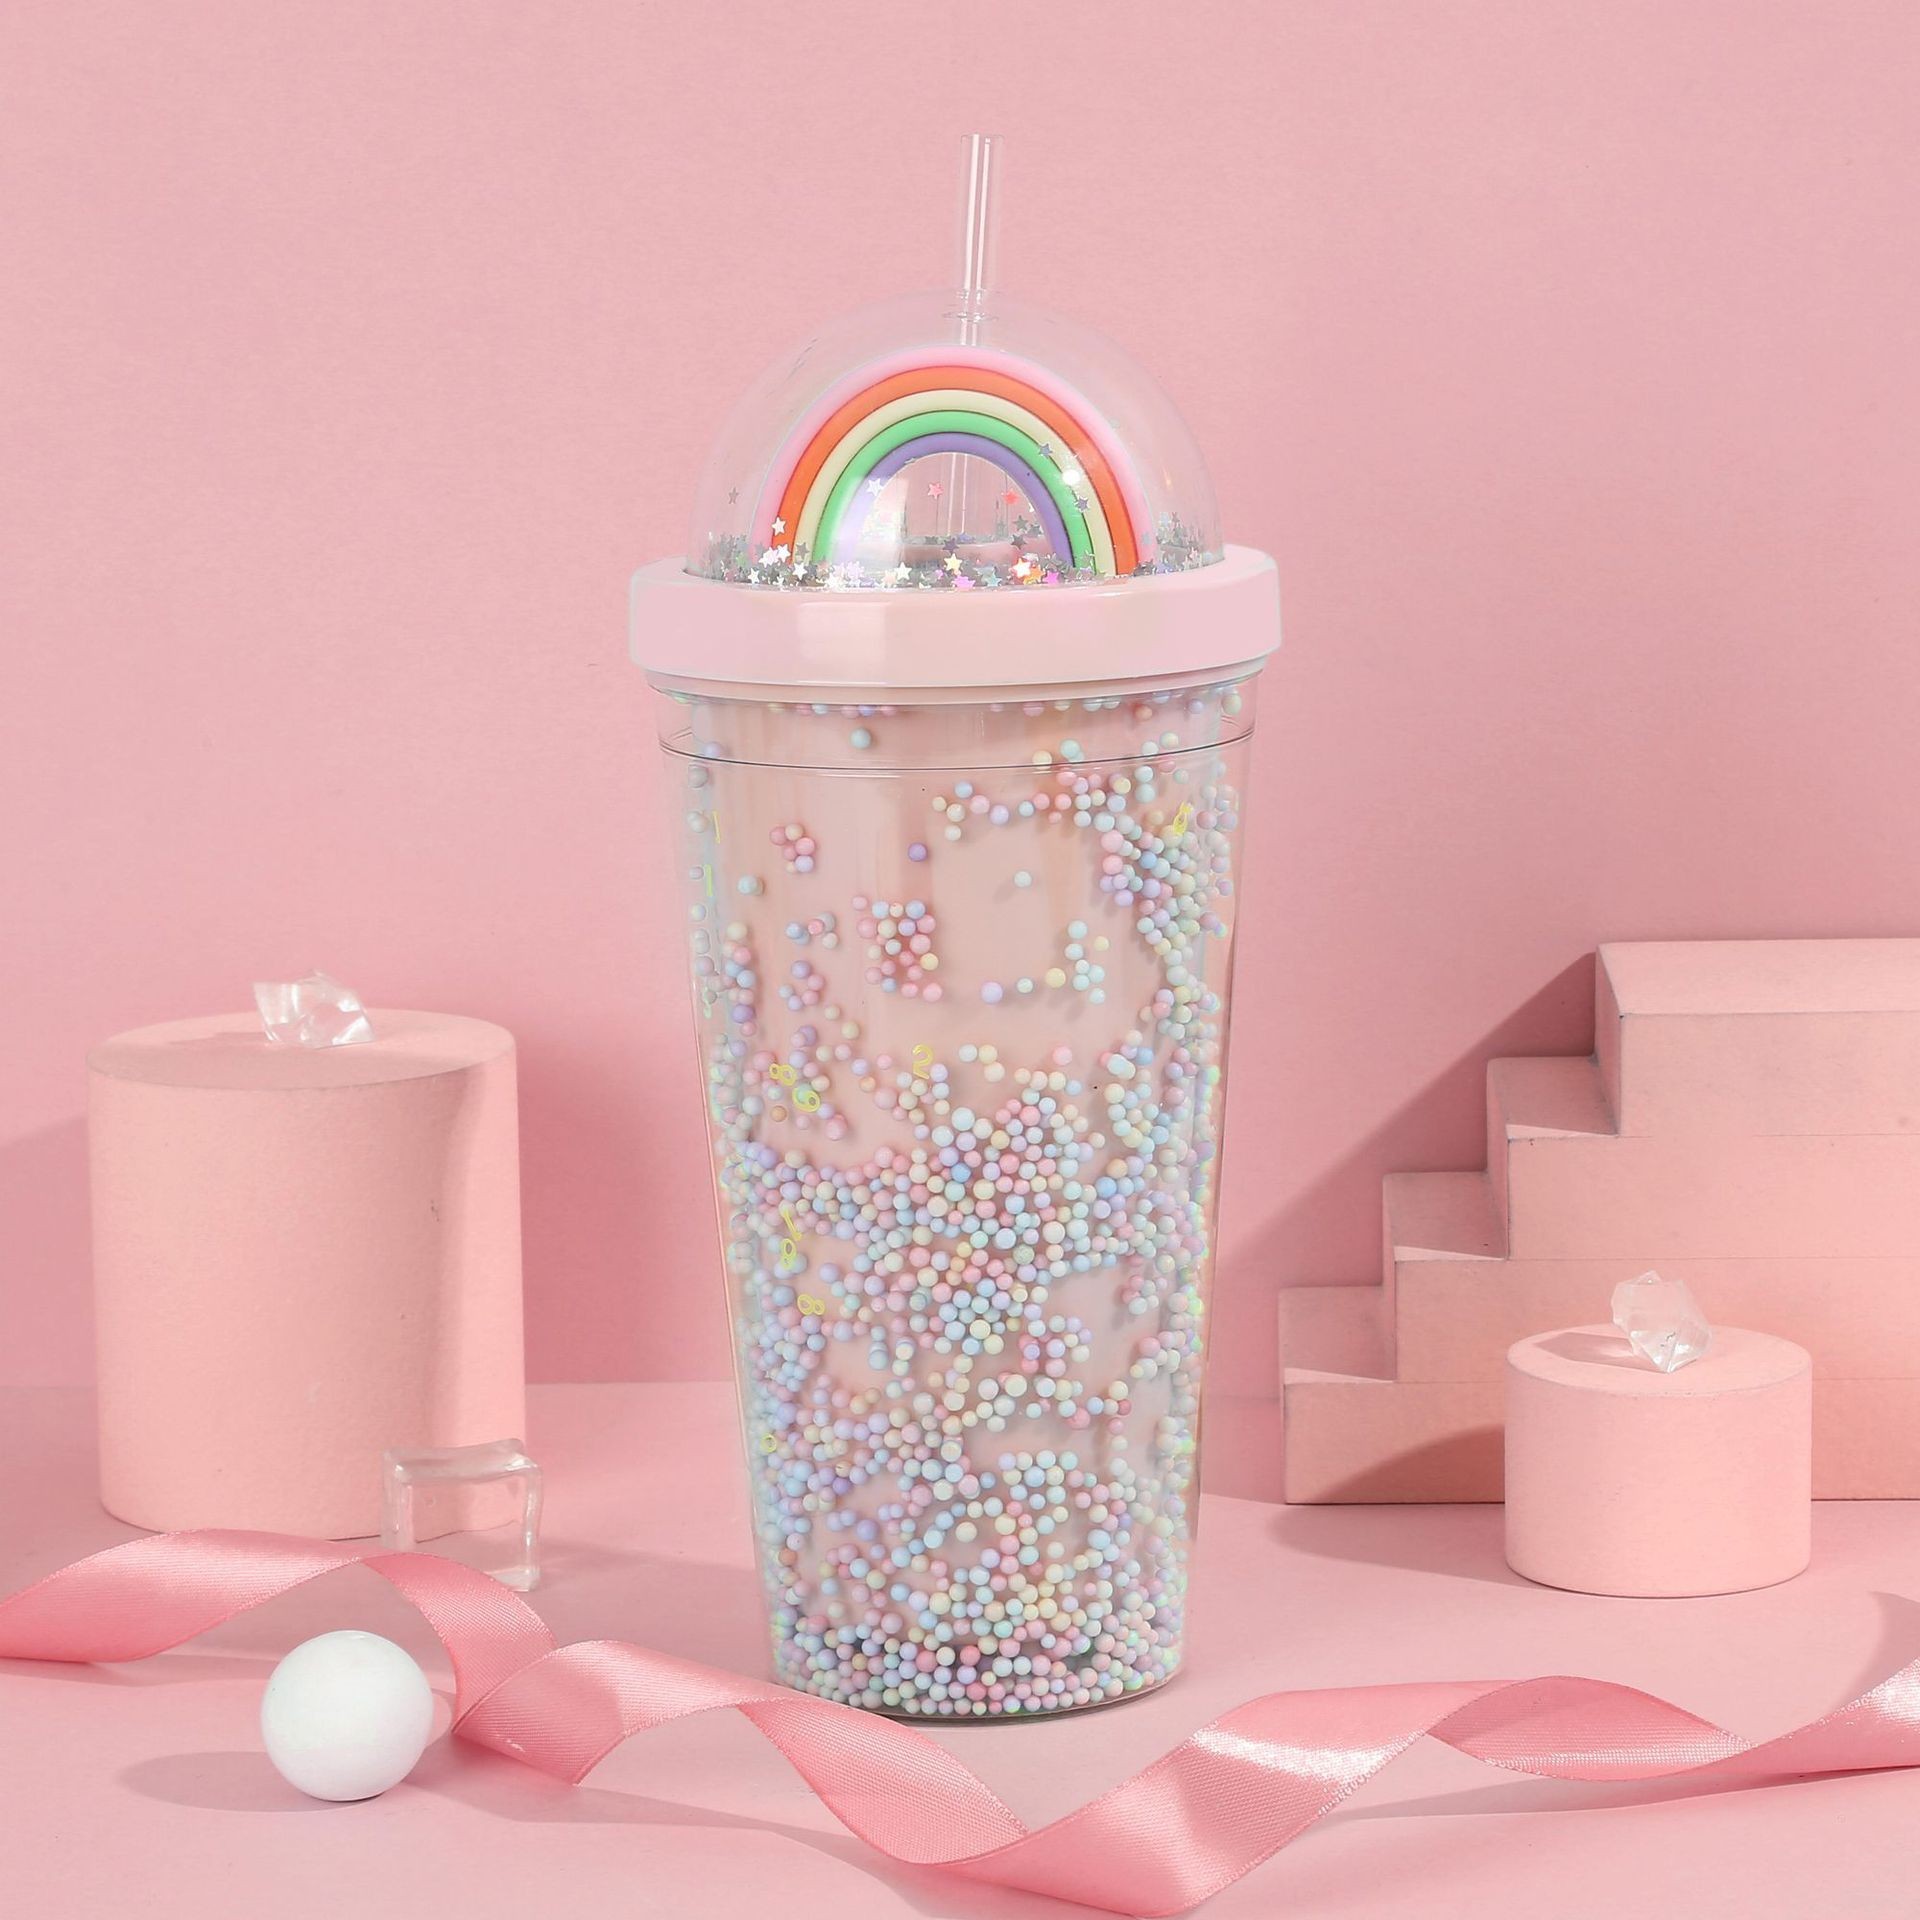 Korean Style Creative Trending Ice Cup Personality Fashion Foam Rainbow Plastic Cup Male and Female Student Couple Straw Cup